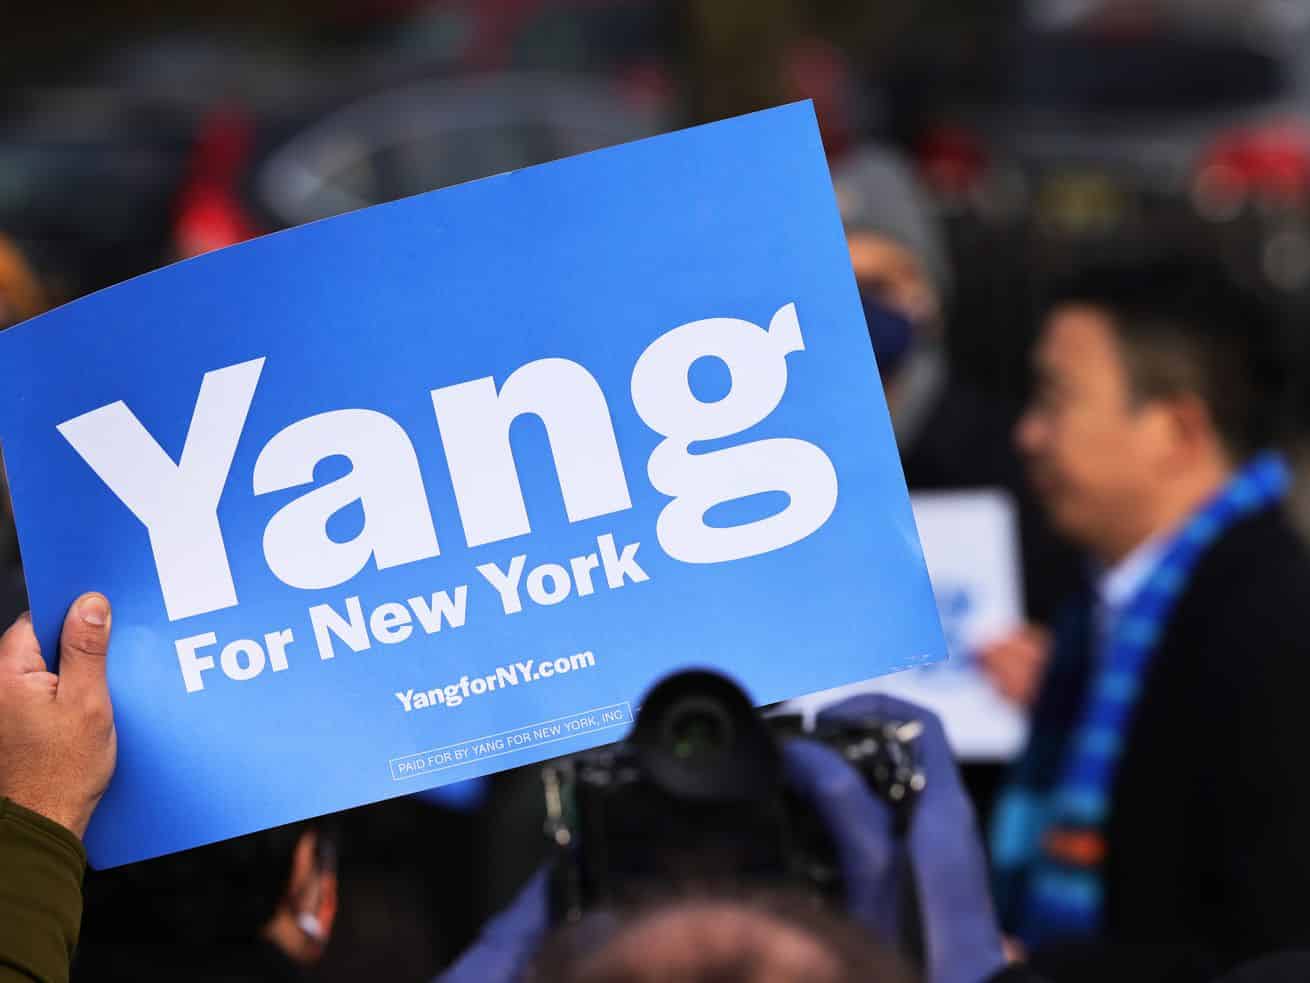 Andrew Yang’s campaign is cutting ties with a fundraiser once accused of sexual misconduct